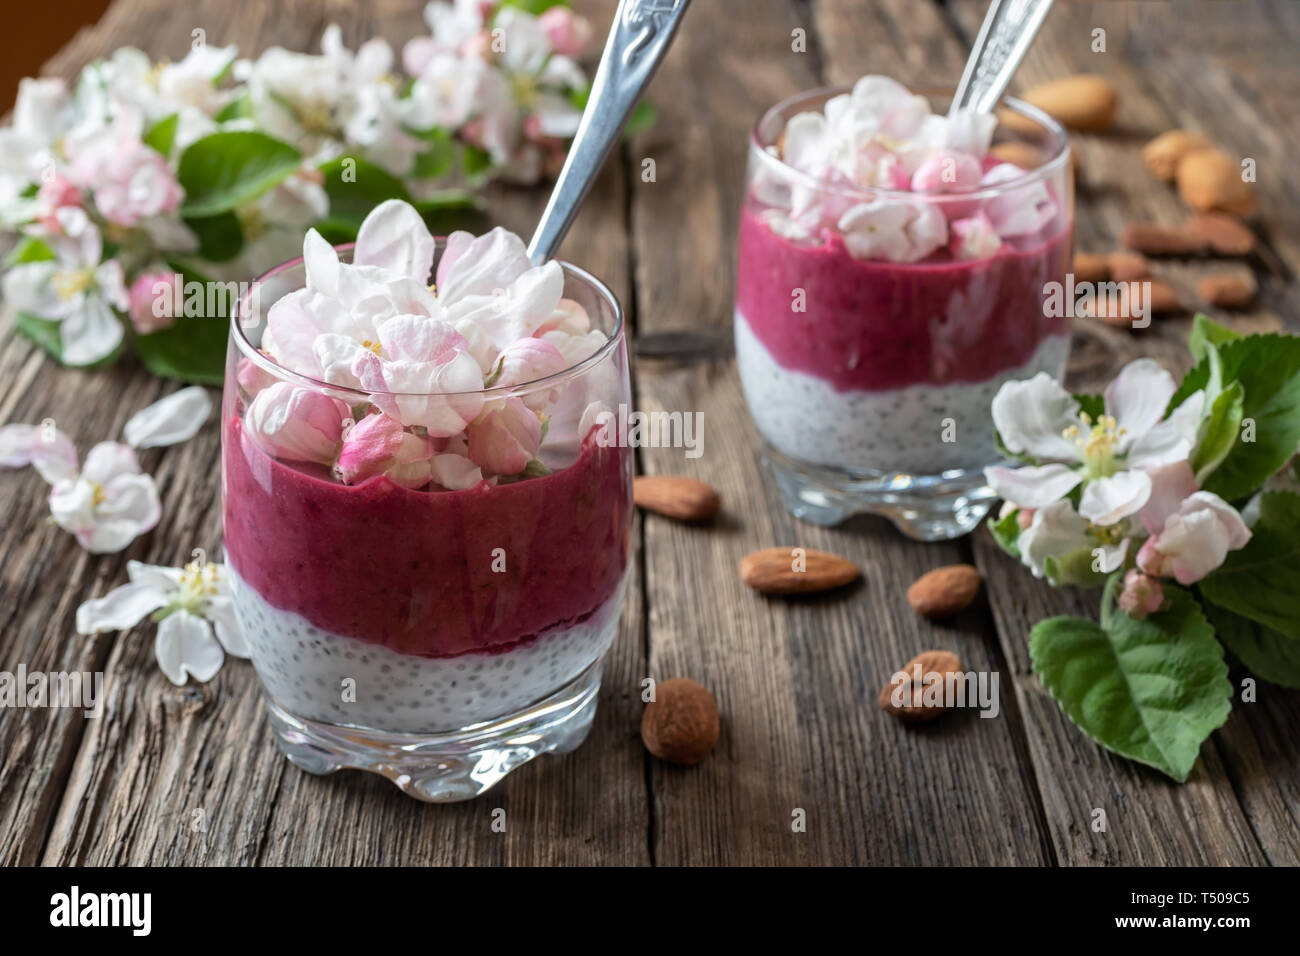 Layered chia pudding with almond milk, yogurt, blueberries and apple blossoms, top view Stock Photo